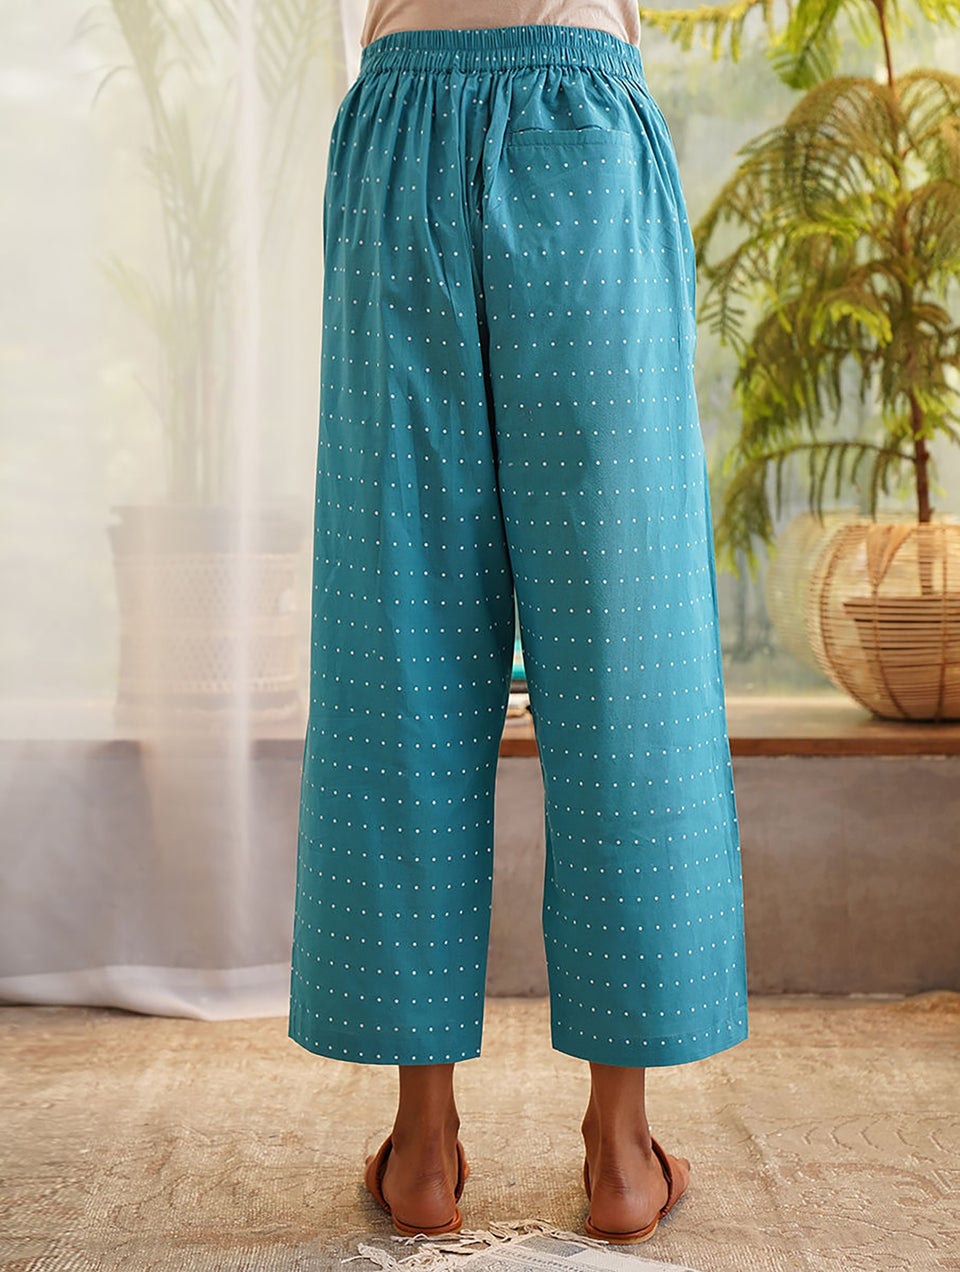 Blue Printed Tie-Up Waist Cotton Pants with Pockets - XS